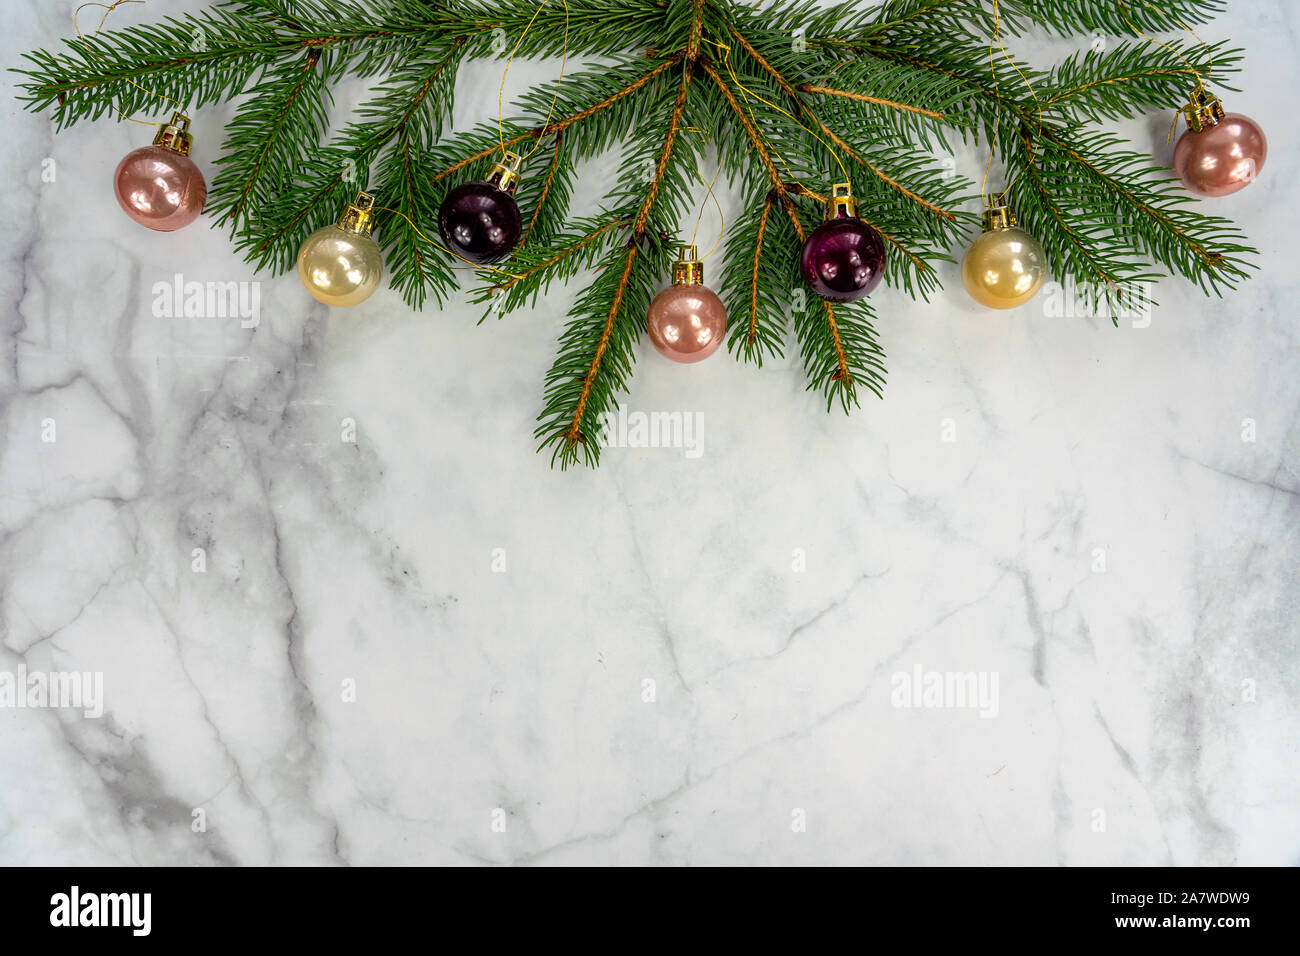 Christmas frame background flat lay on marbel with decoration ornament on pine tree Stock Photo